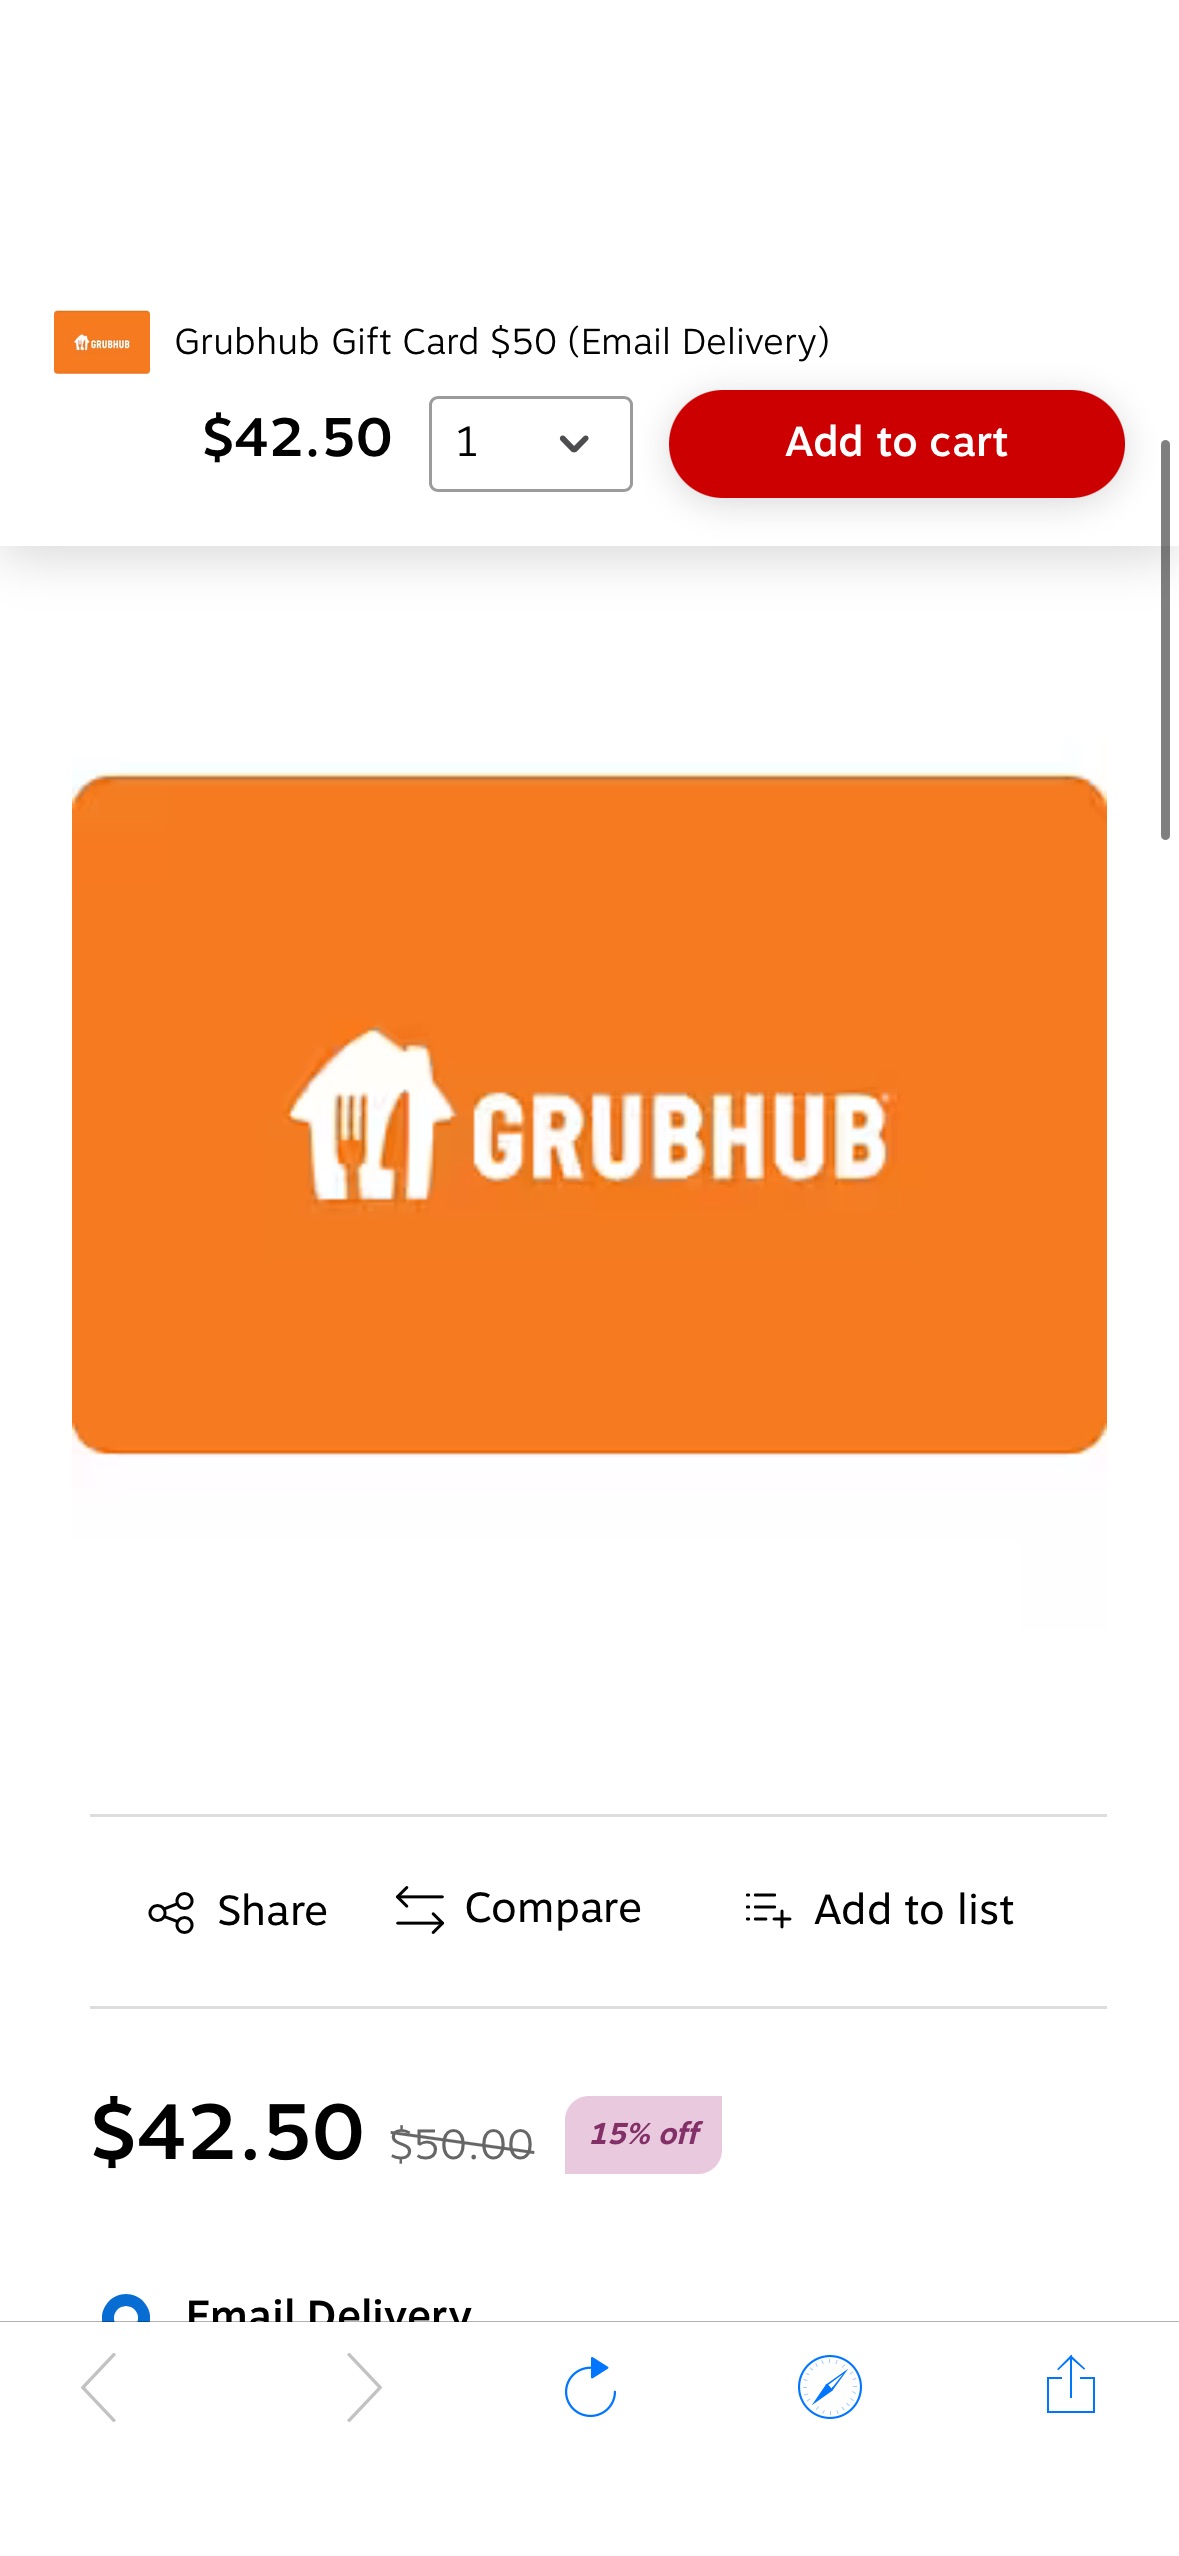 Grubhub Gift Card $50 (Email Delivery) | Staples